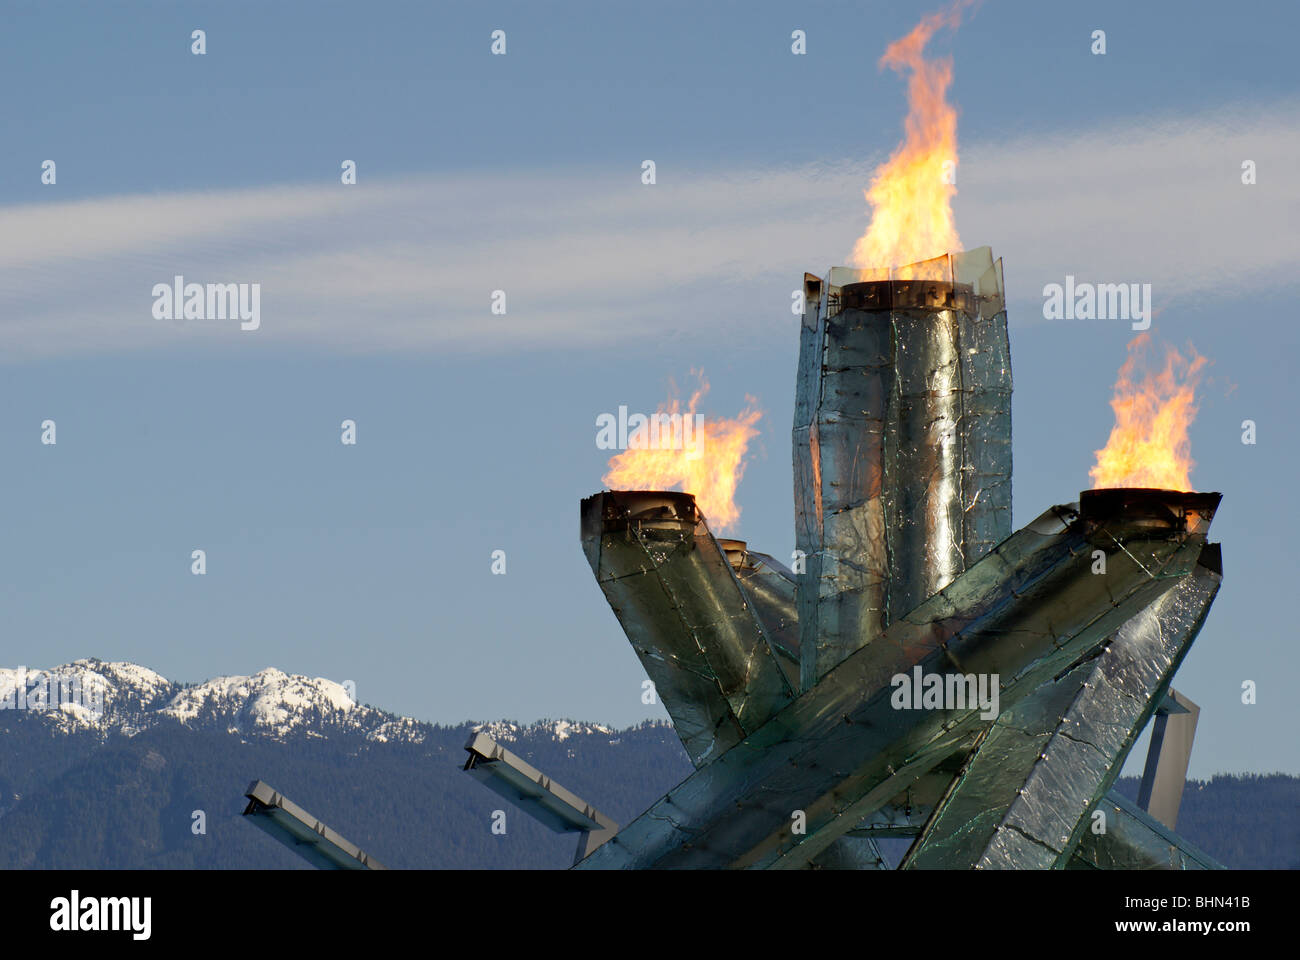 the-olympic-cauldron-at-the-2010-winter-